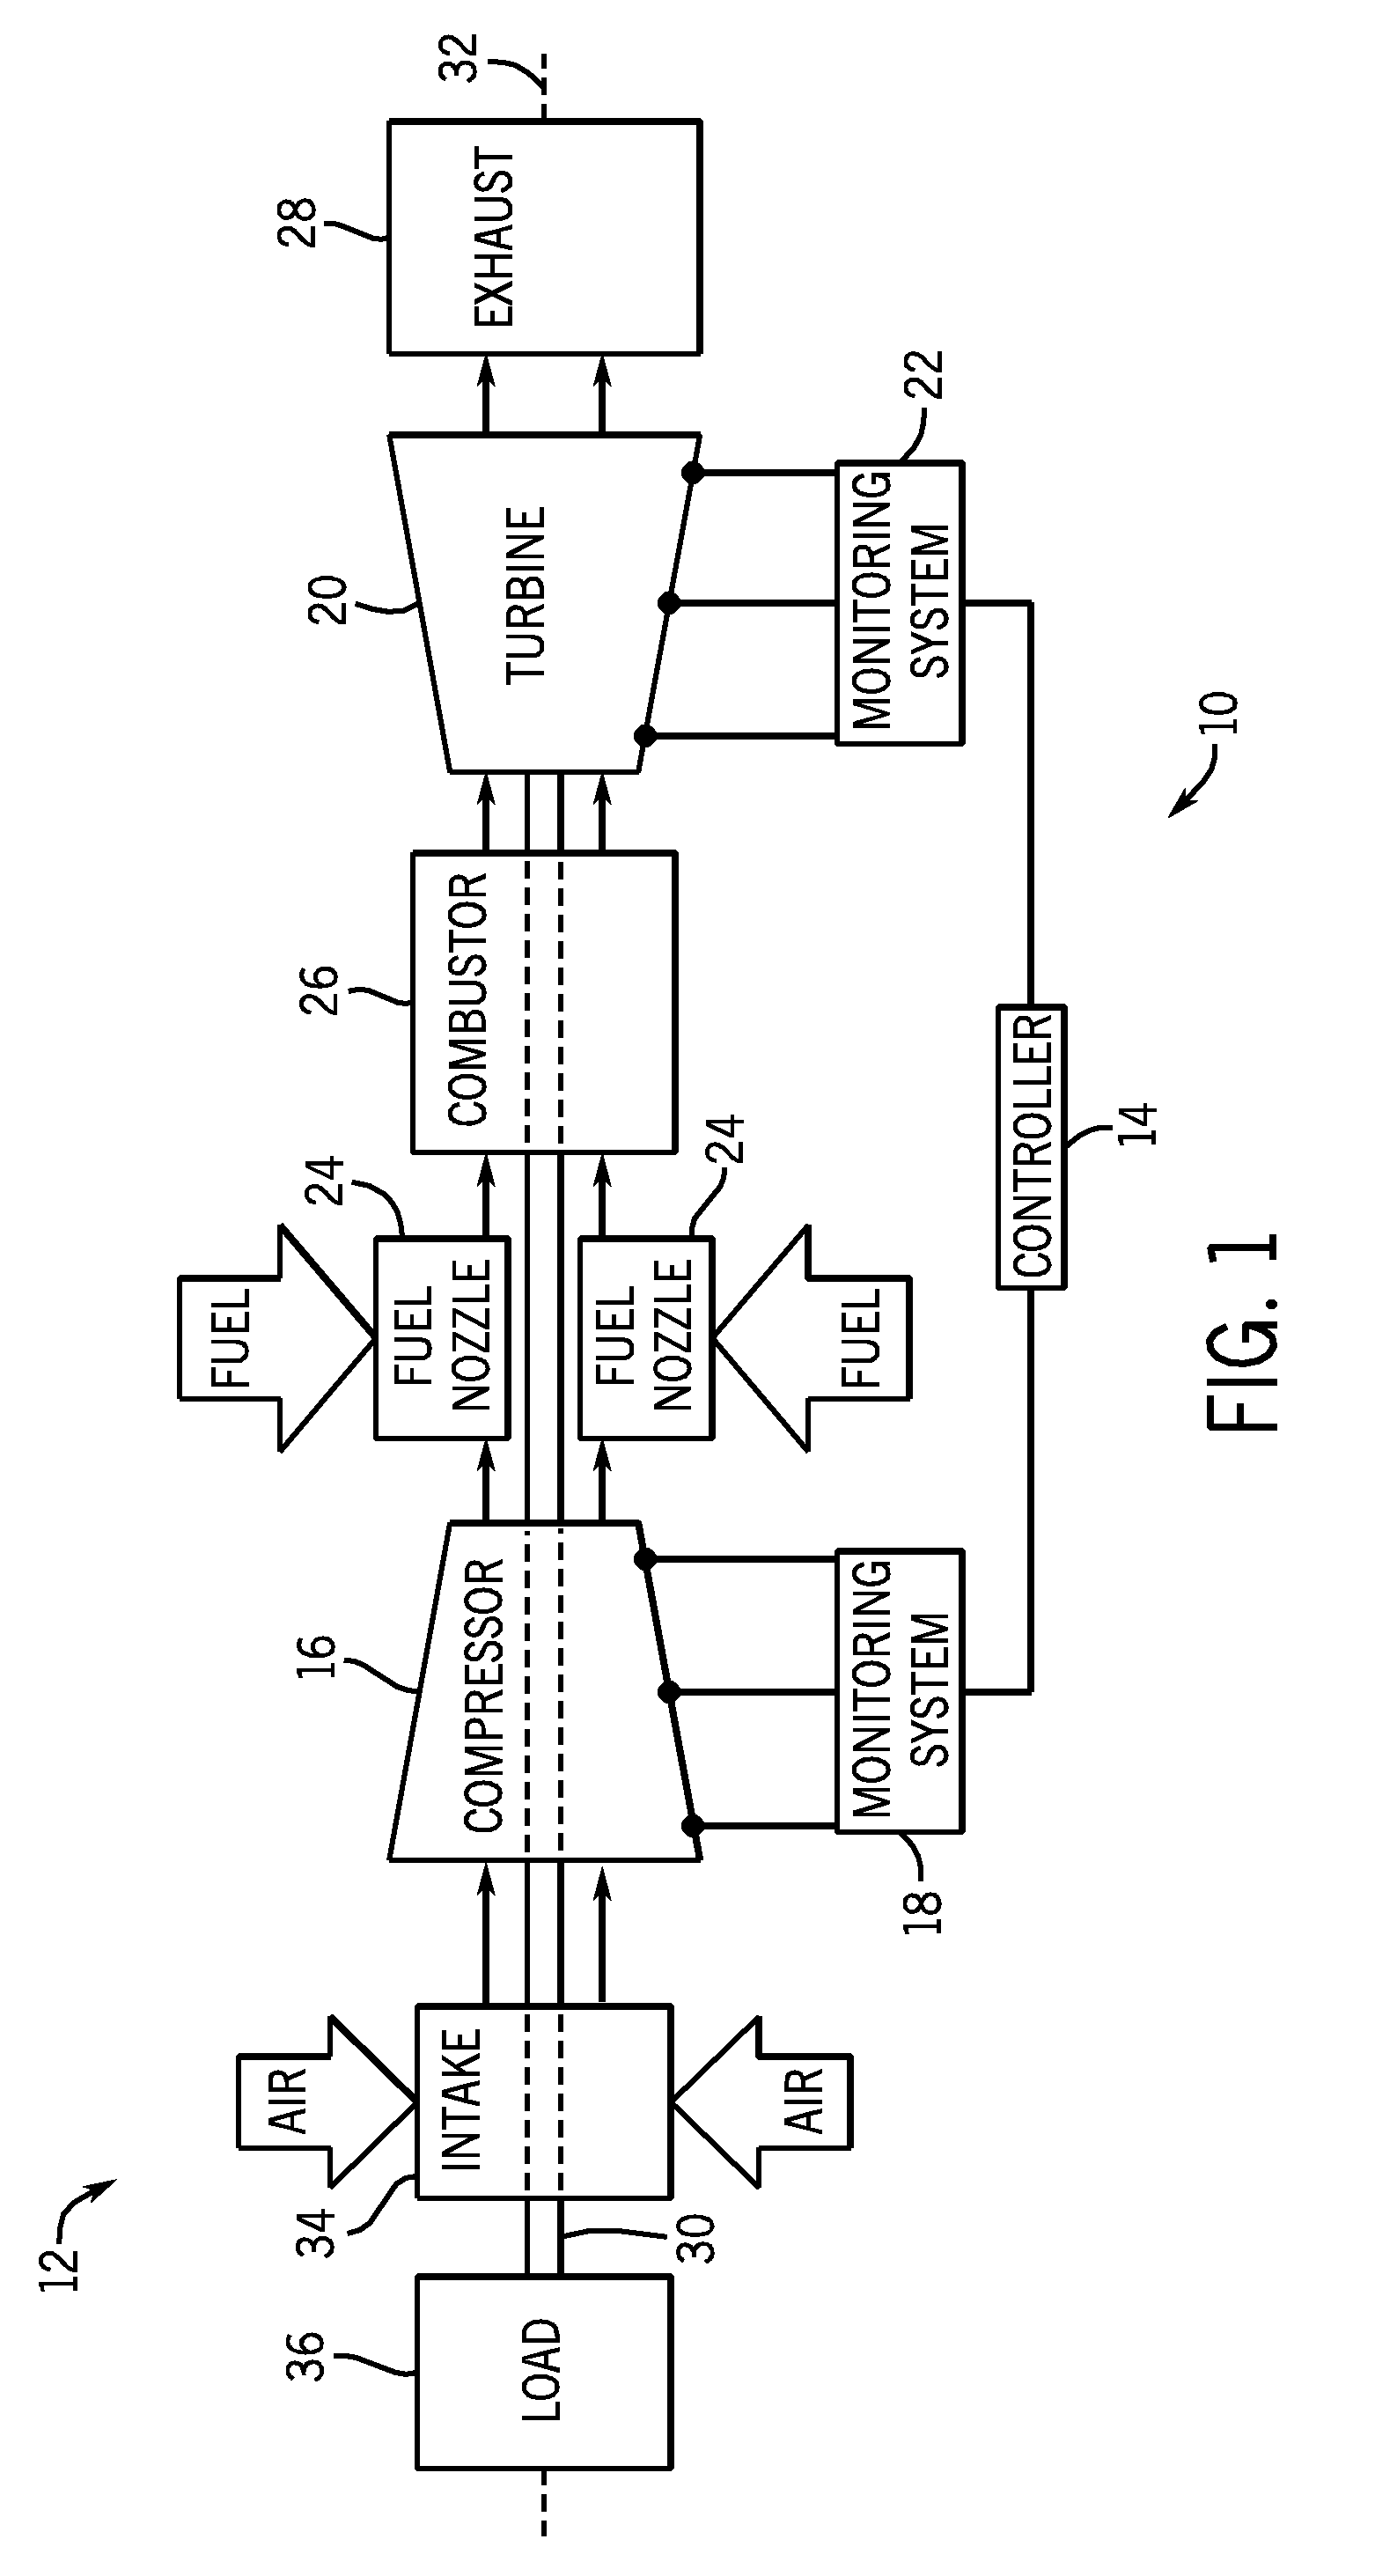 Multi-stage compressor fault detection and protection